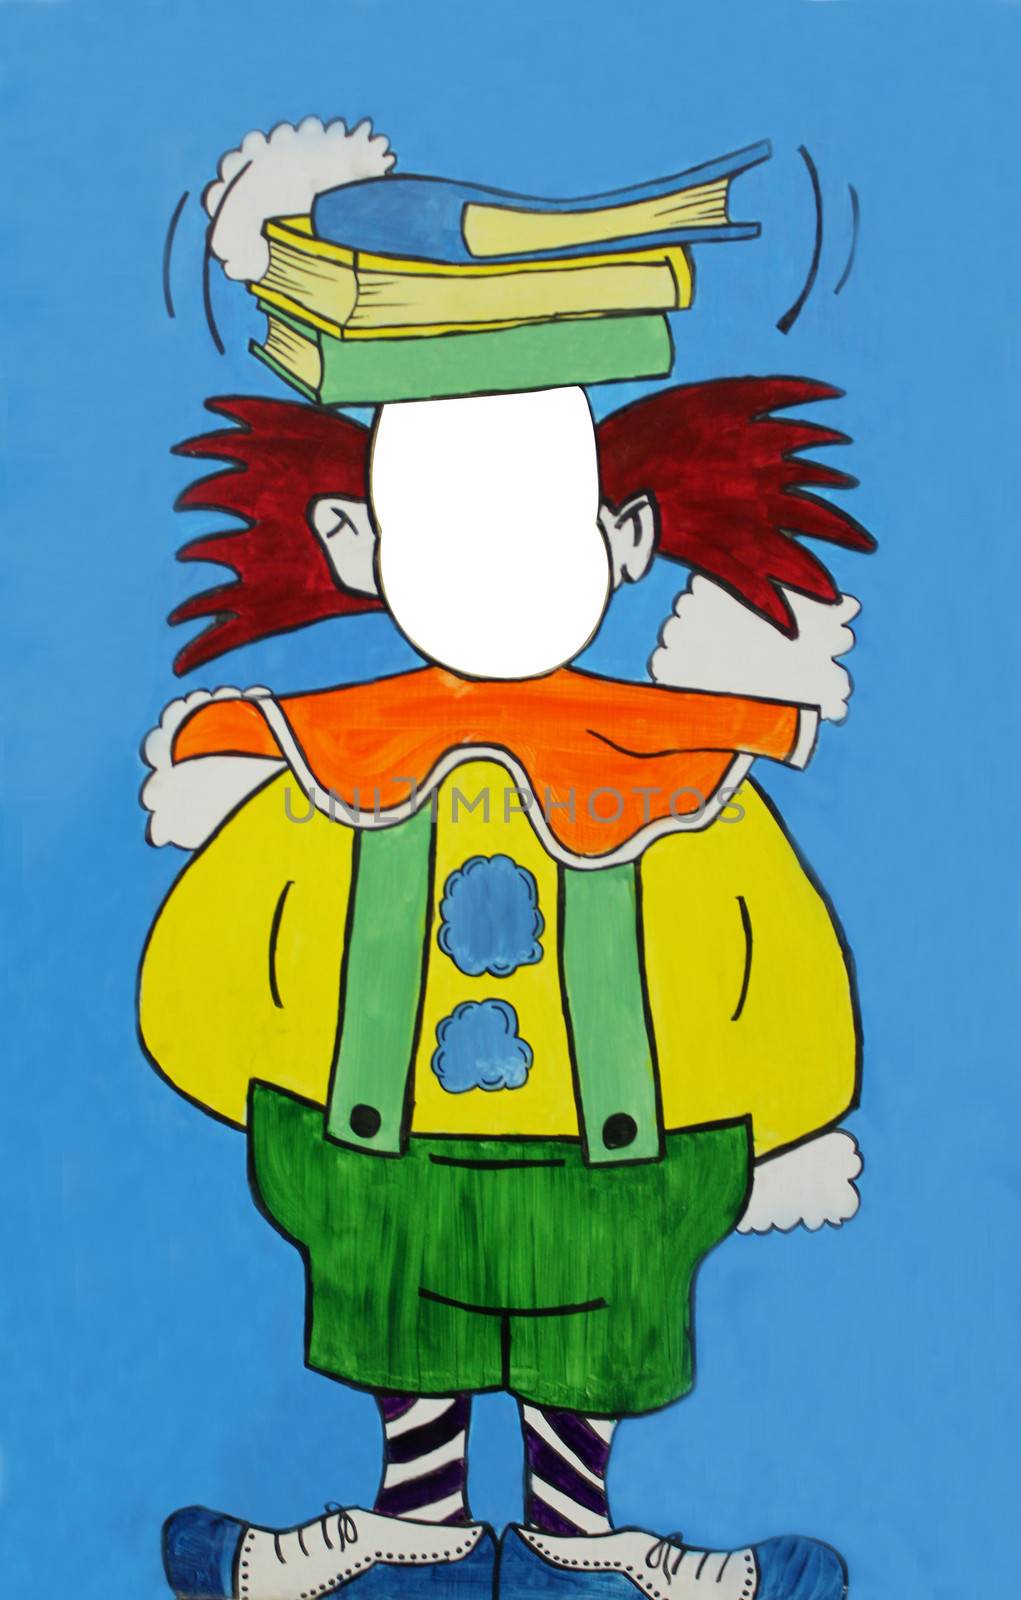 Painting of cutout circus clown with white copy space for you to add face in. Original artwork.